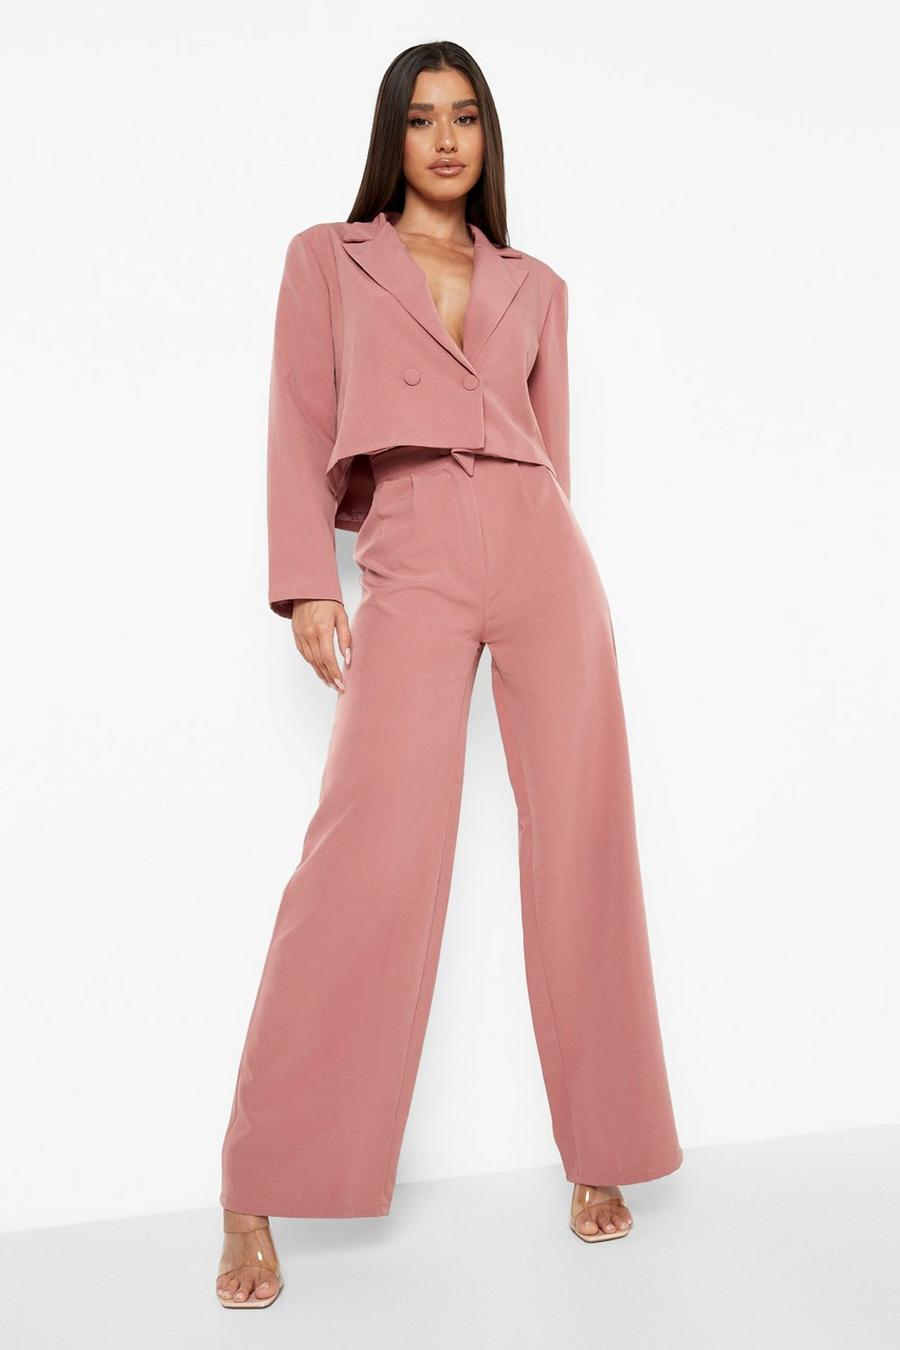 Dusty rose pink Pleat Front Relaxed Fit Wide Leg Trousers